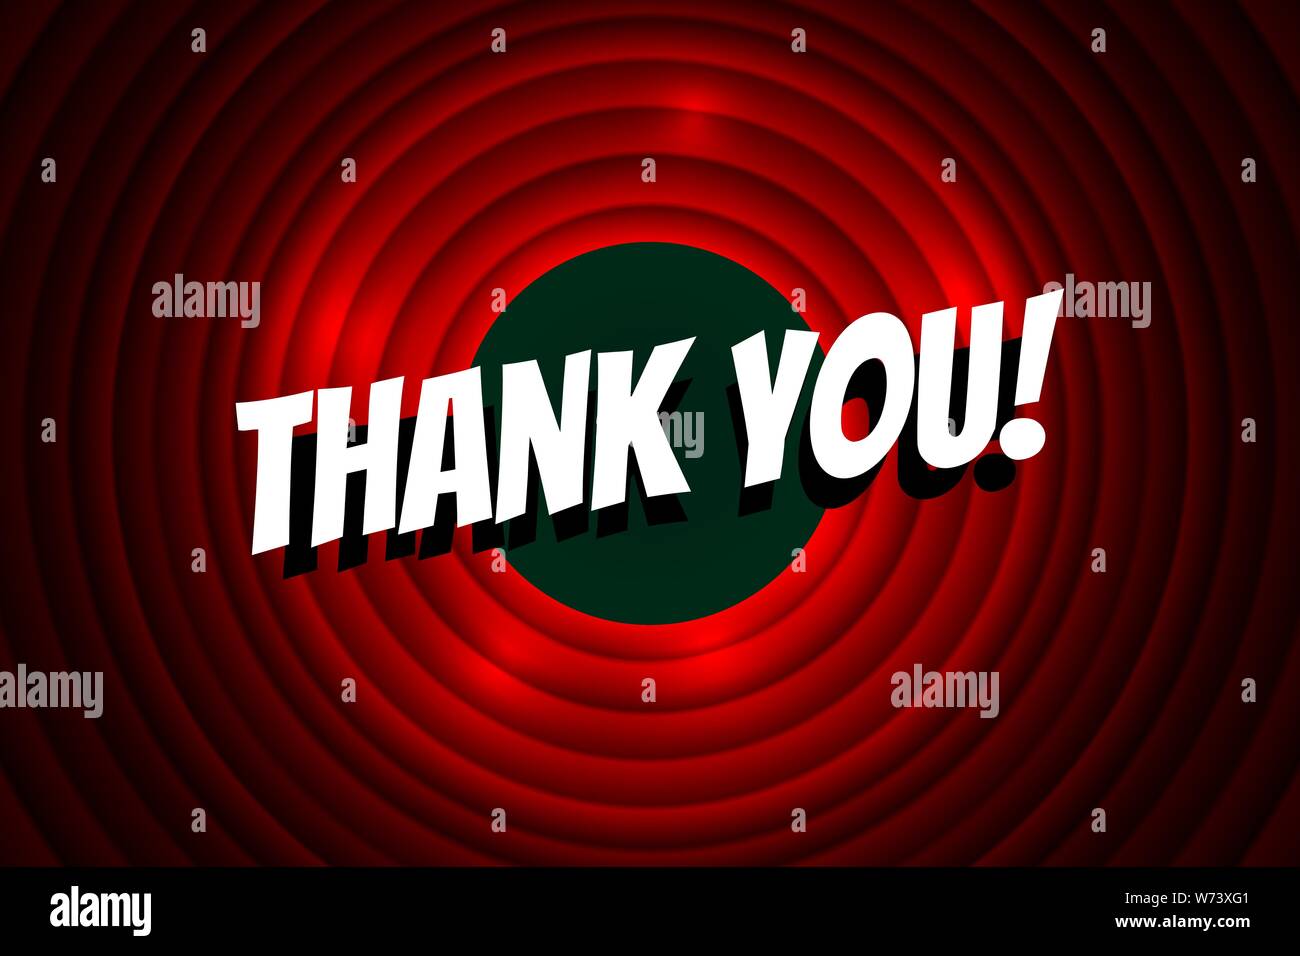 Thank you comics font title on red circle background. Old cinema movie round screen. Vector greeting card template illustration Stock Vector